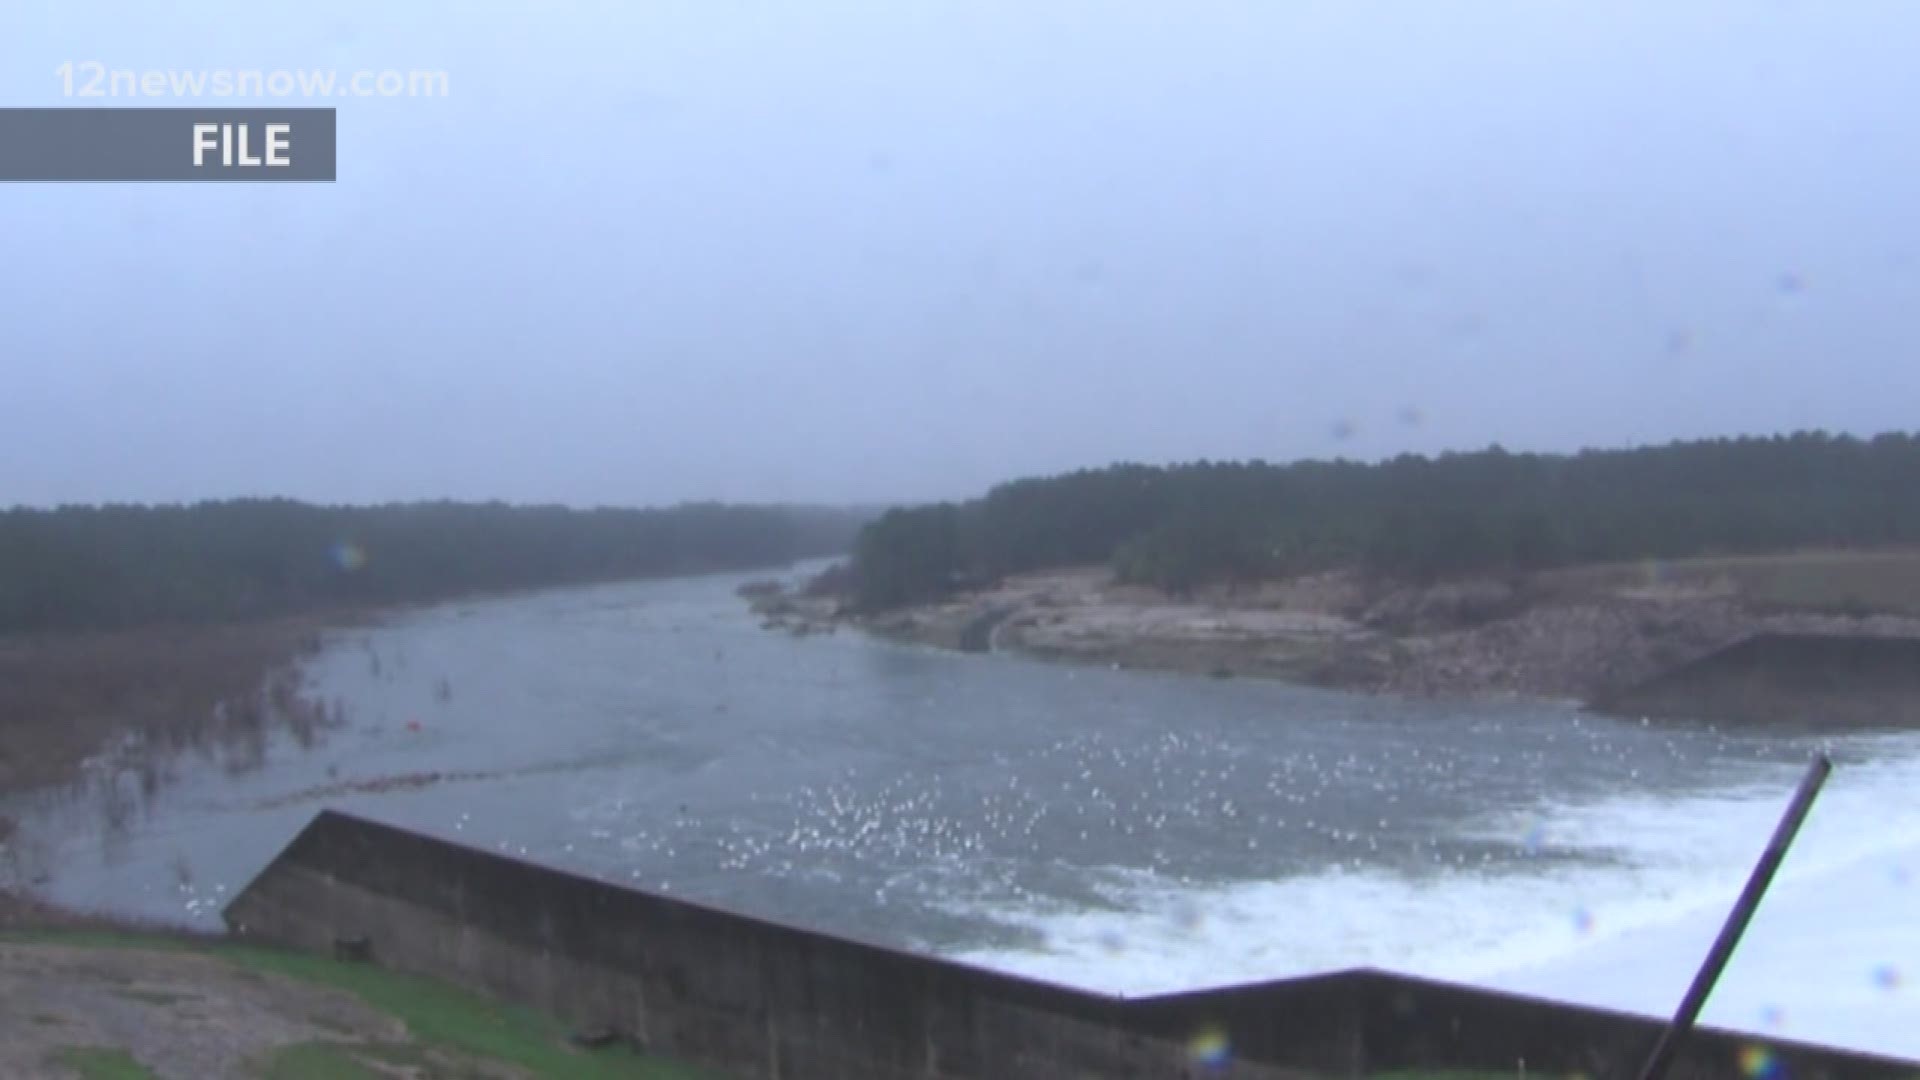 Five of the eleven gates are now open one foot each at the spillway.